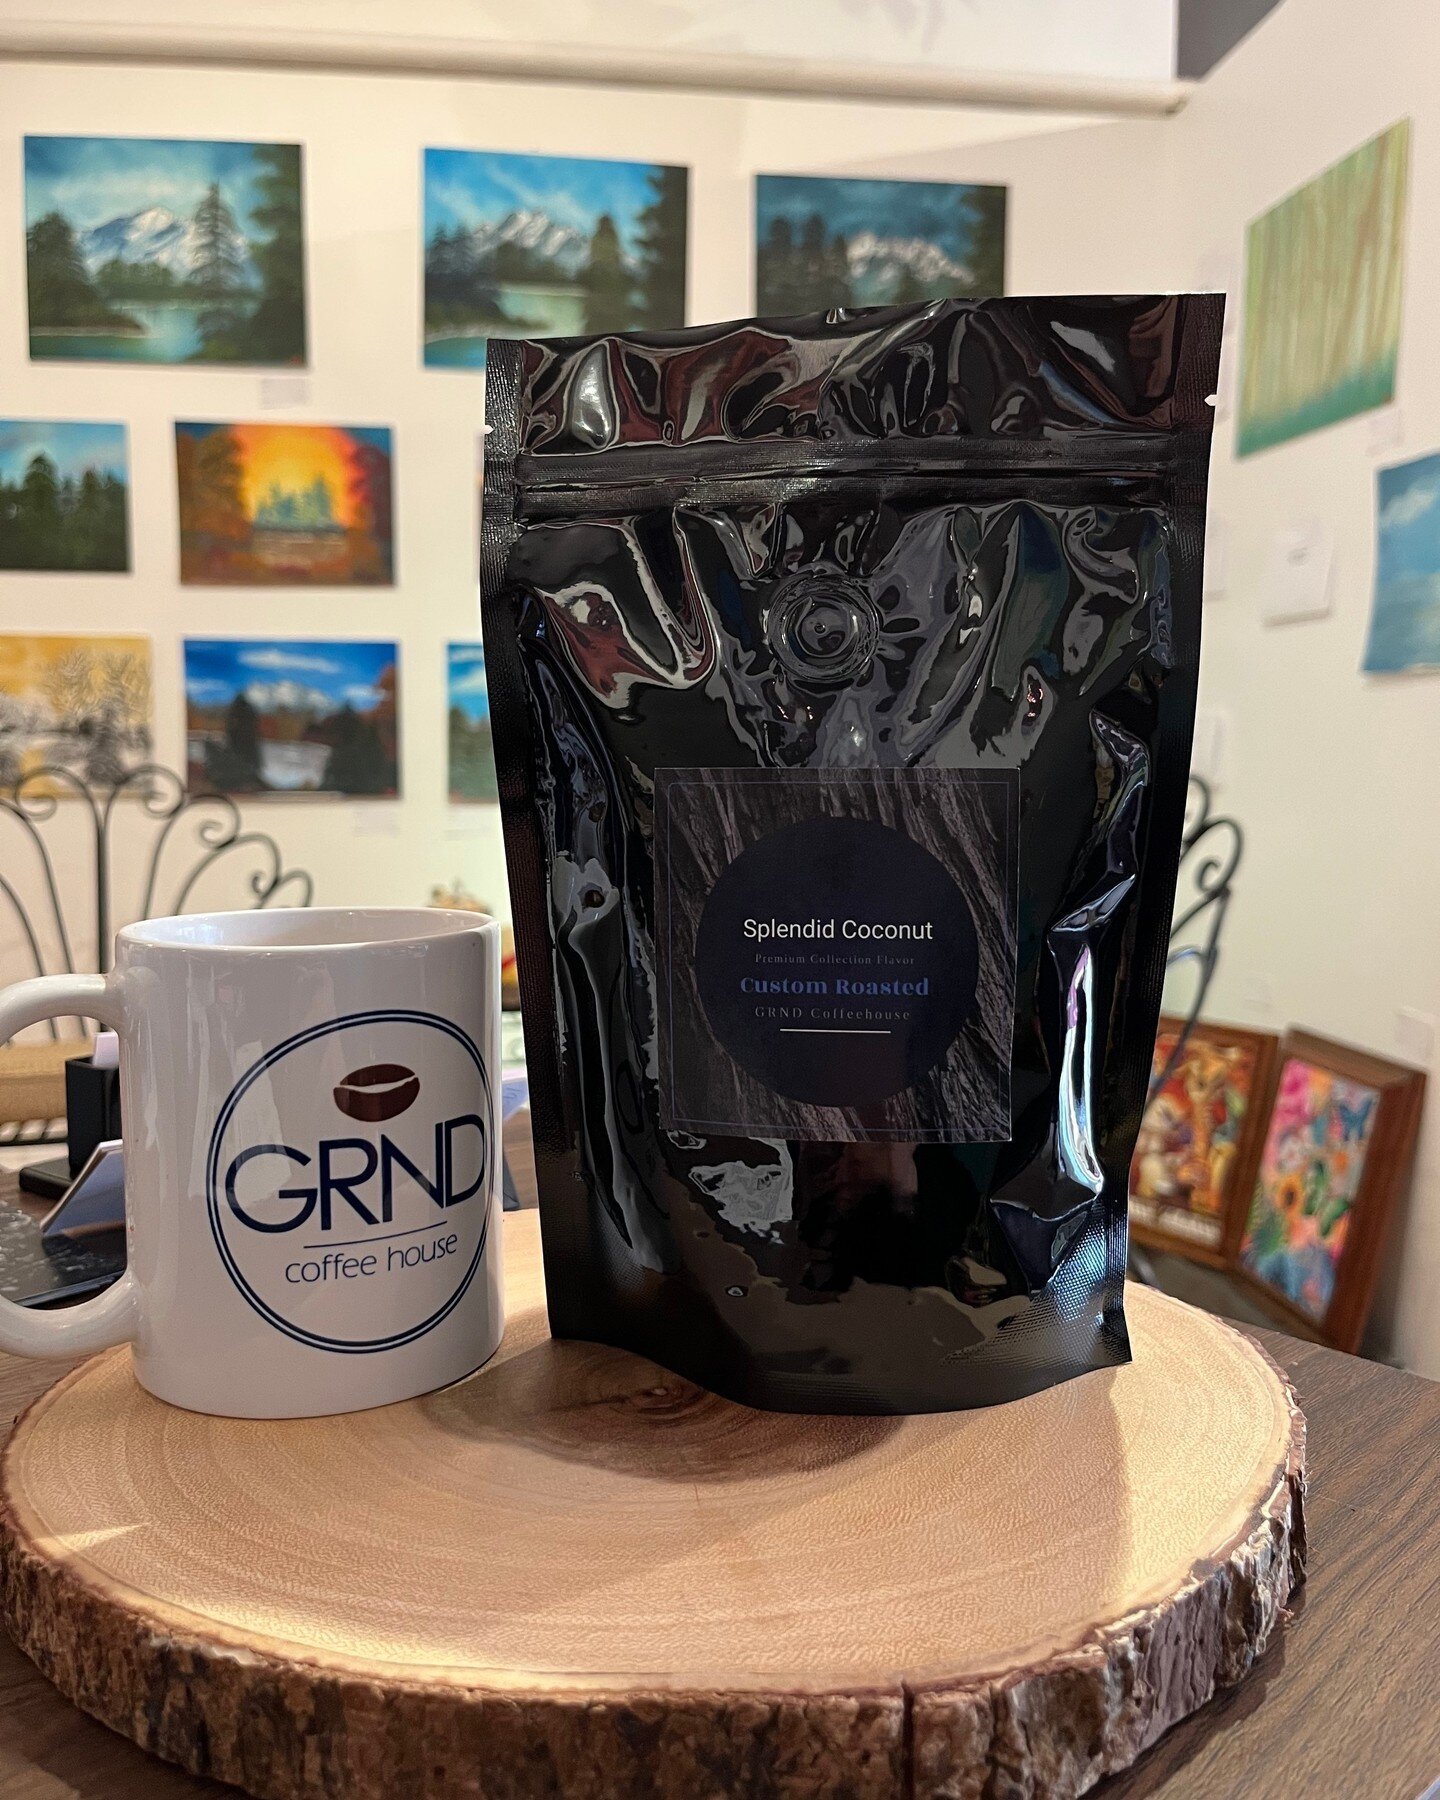 Have a splendid time this holiday season with our splendid coconut coffee

Find coffee like this and more on our website grndcoffeehouse.com

#coffee #holiday #Christmas #oakpark #oakparkartsdiatrict #gift #shop #harrisonstreetartsdistrict #grndcoffe